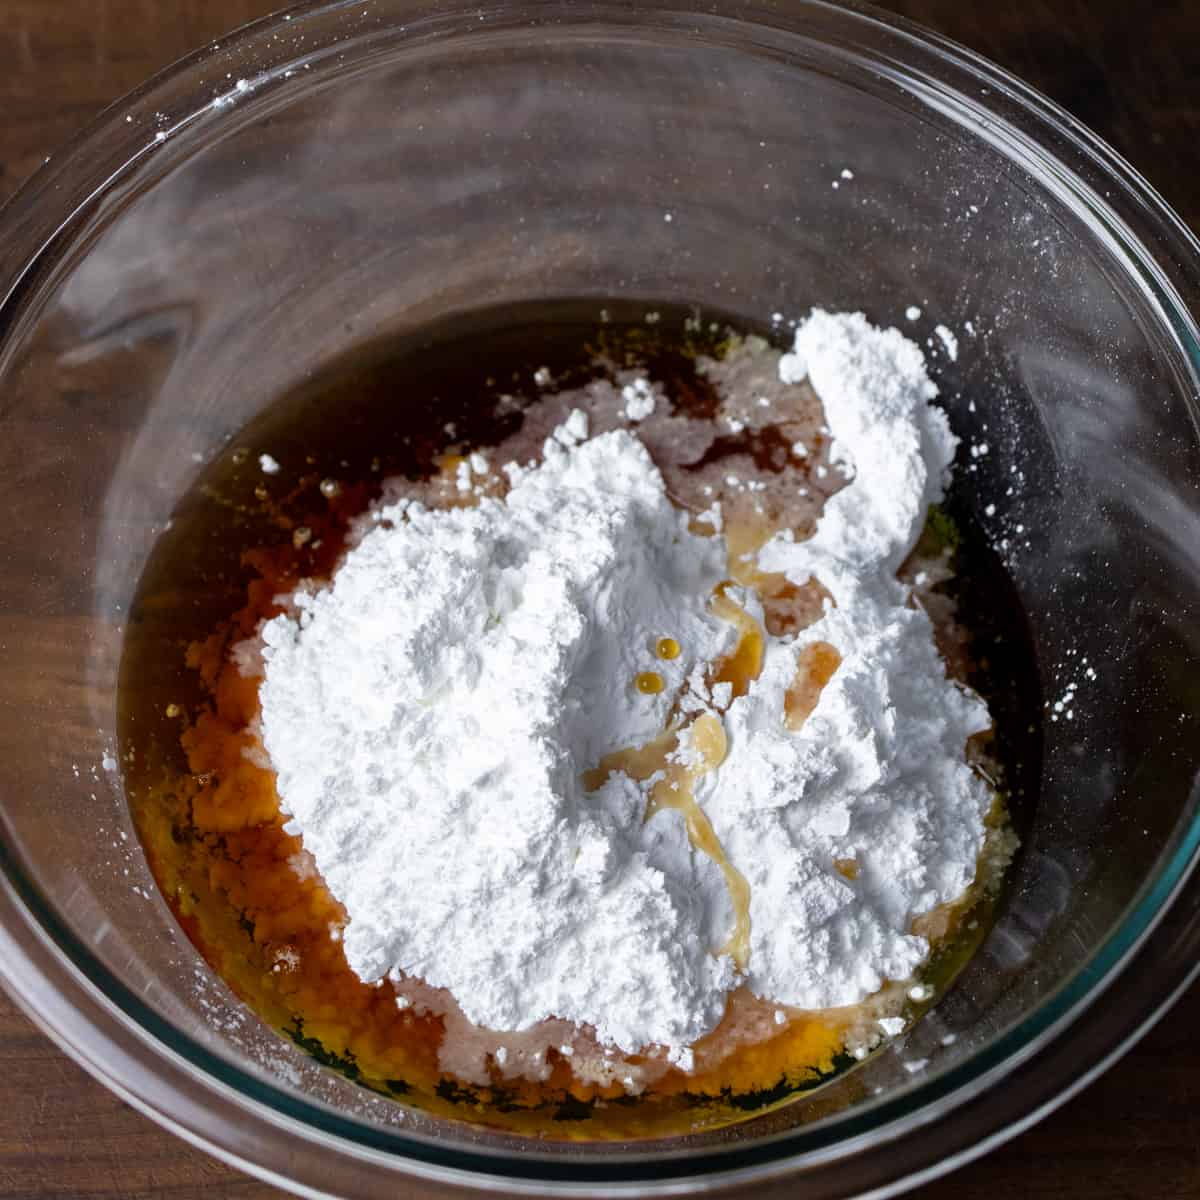 Icing sugar and maple syrup in a glass mixing bowl.